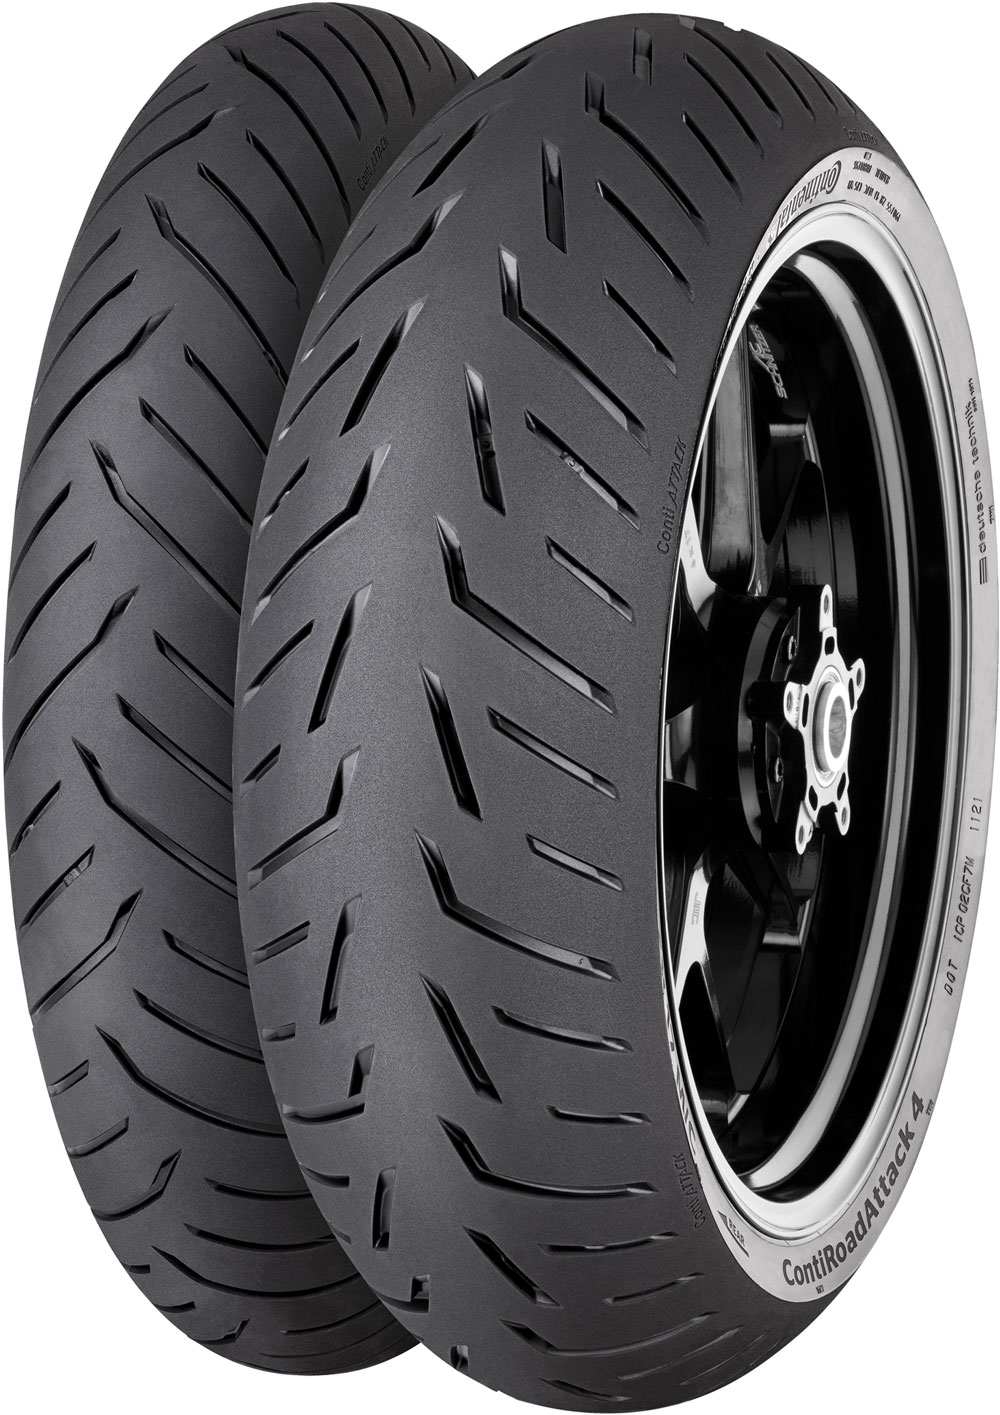 product_type-moto_tires CONTINENTAL RDATTACK4 170/60 R17 72W